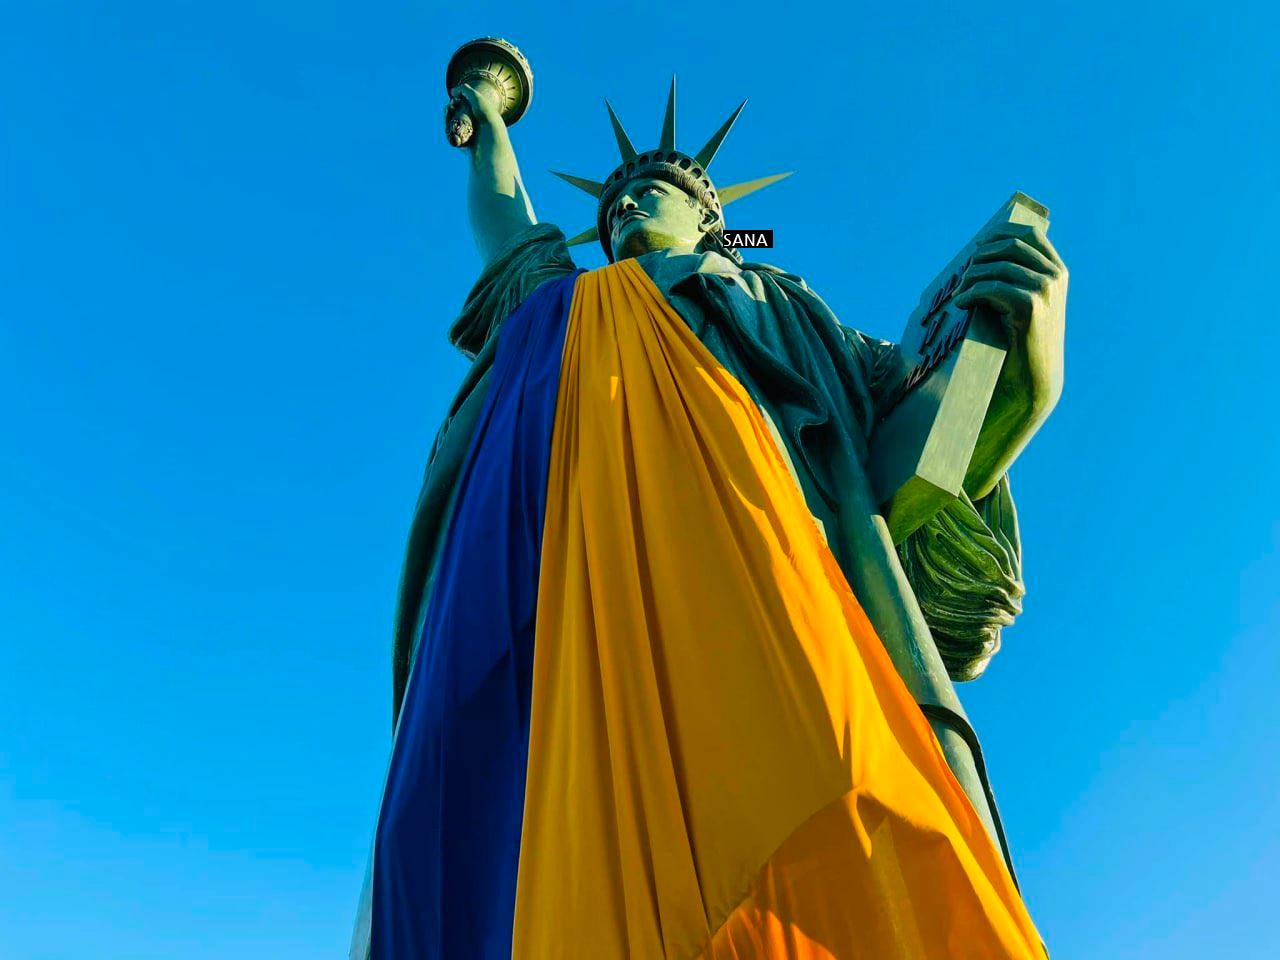 The Statue of Liberty wearing the Ukrainian flag.